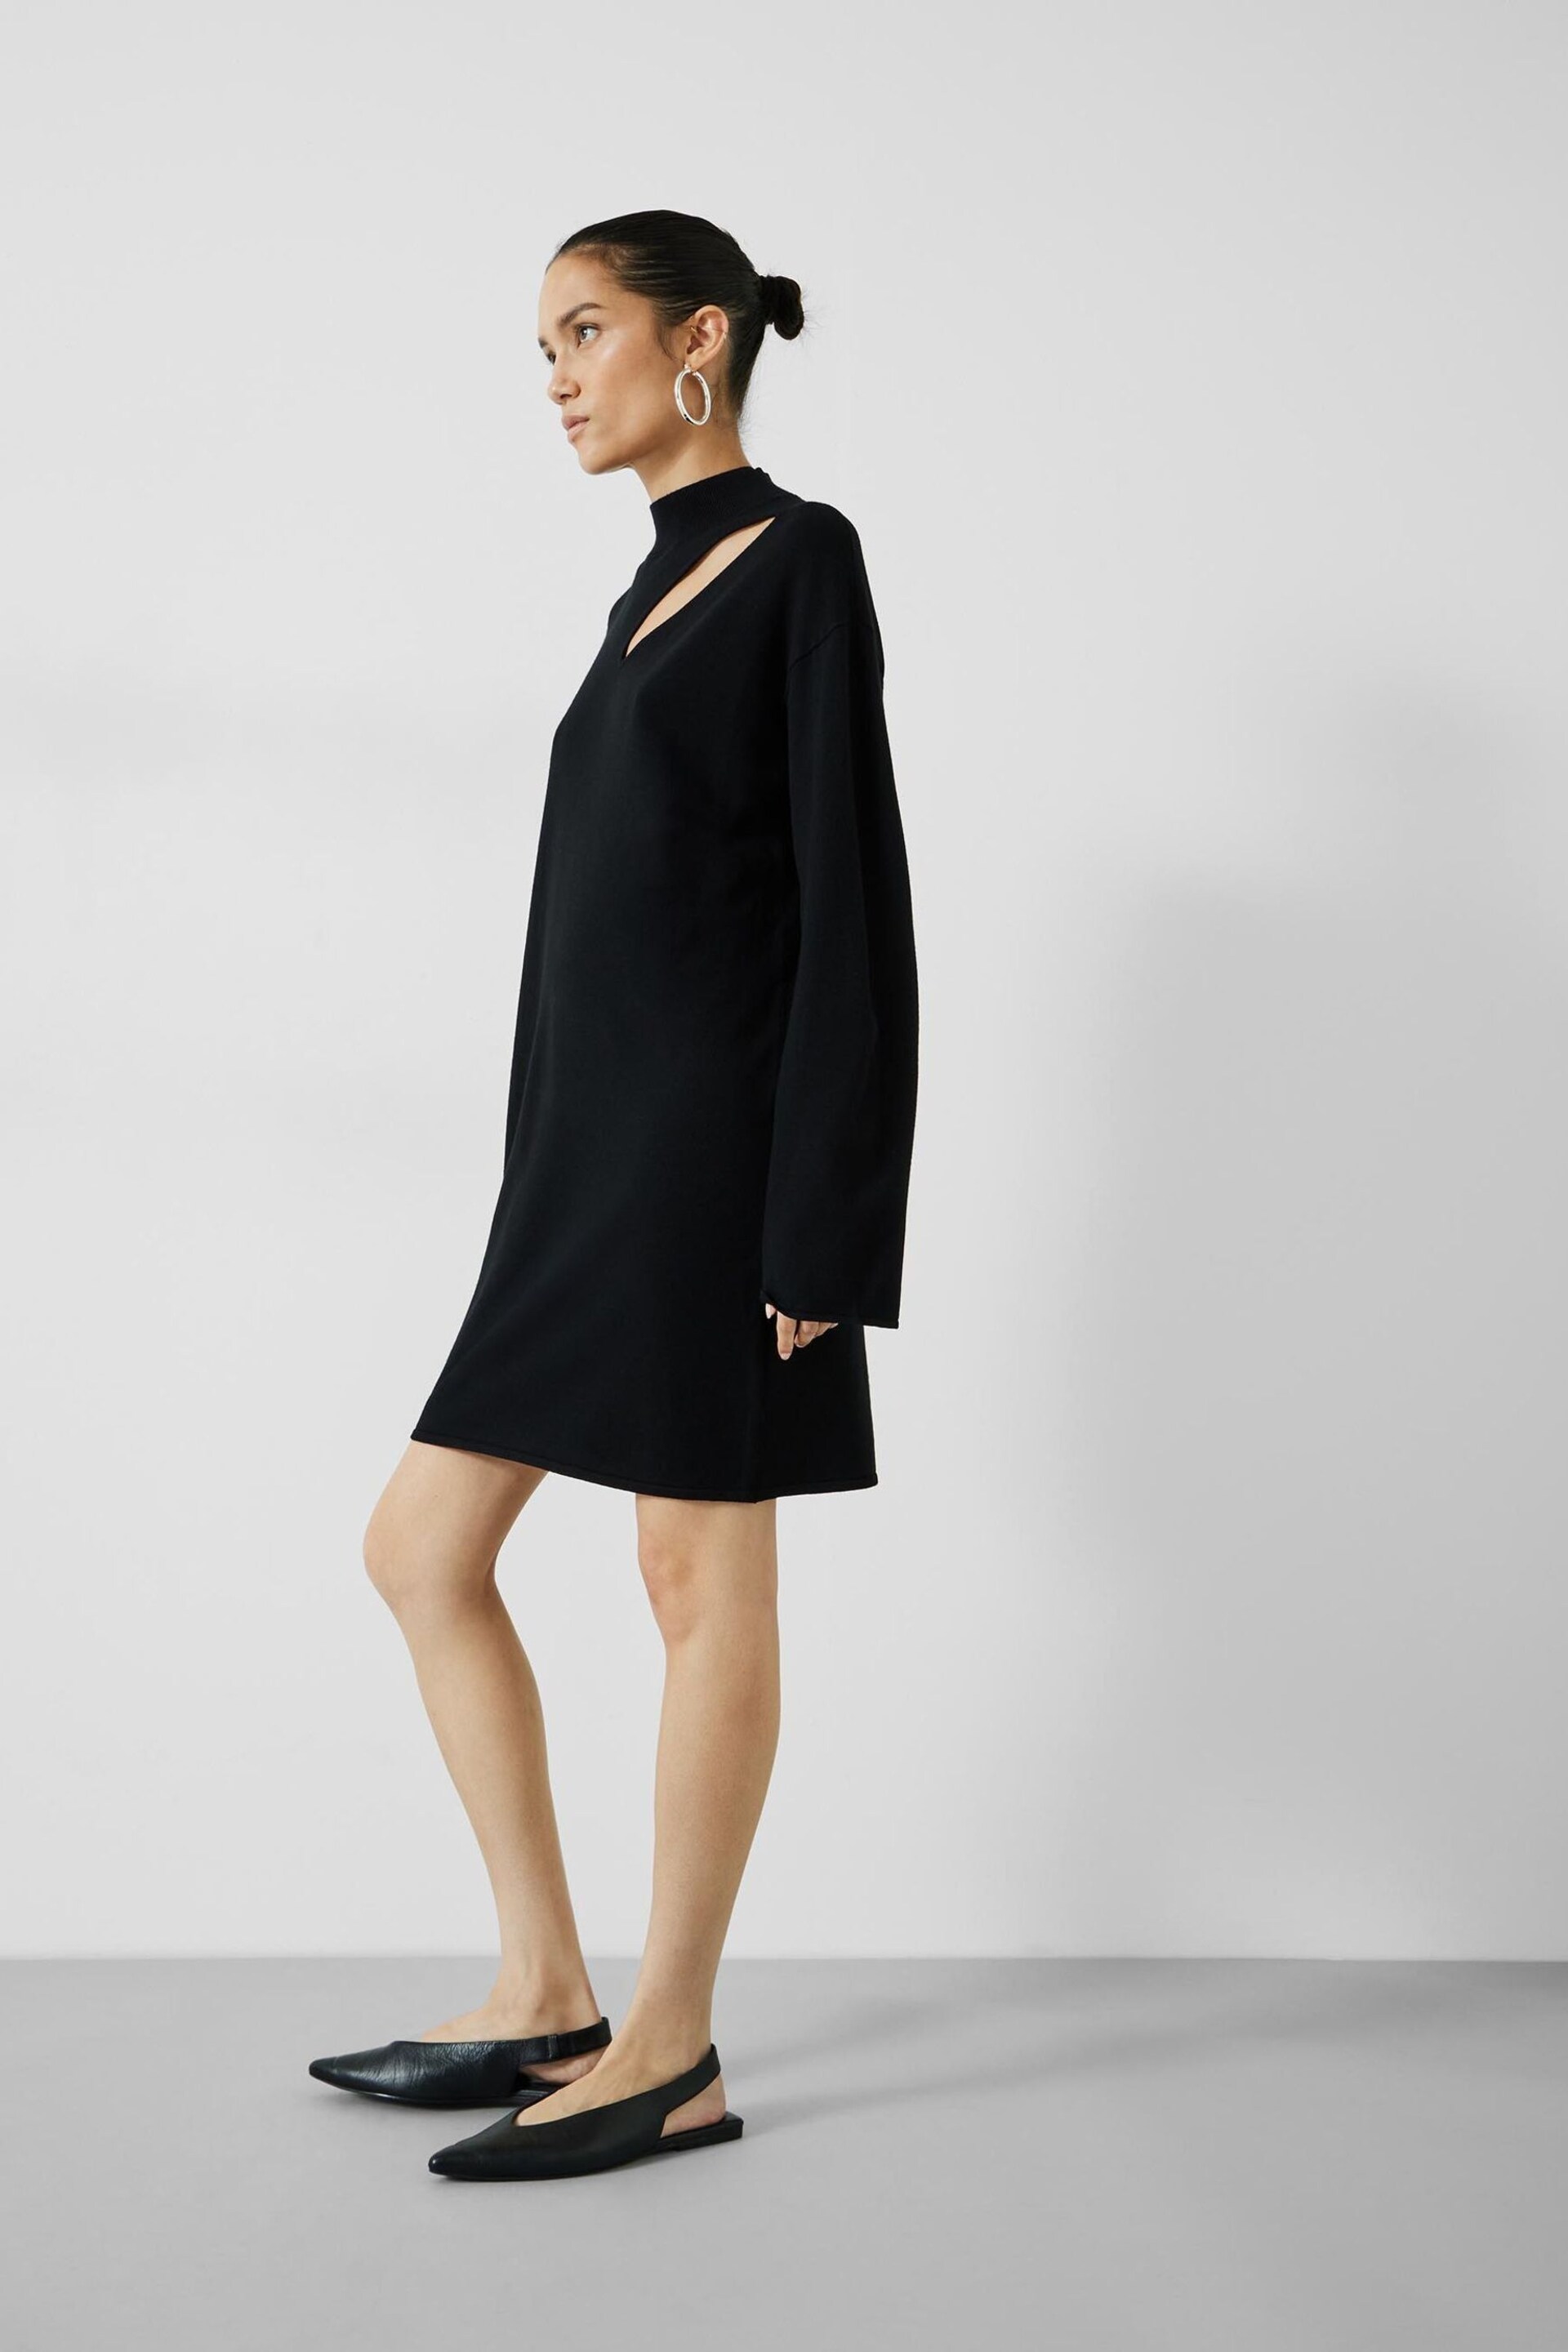 Hush Black Colby Cut Out Knitted Dress - Image 3 of 5